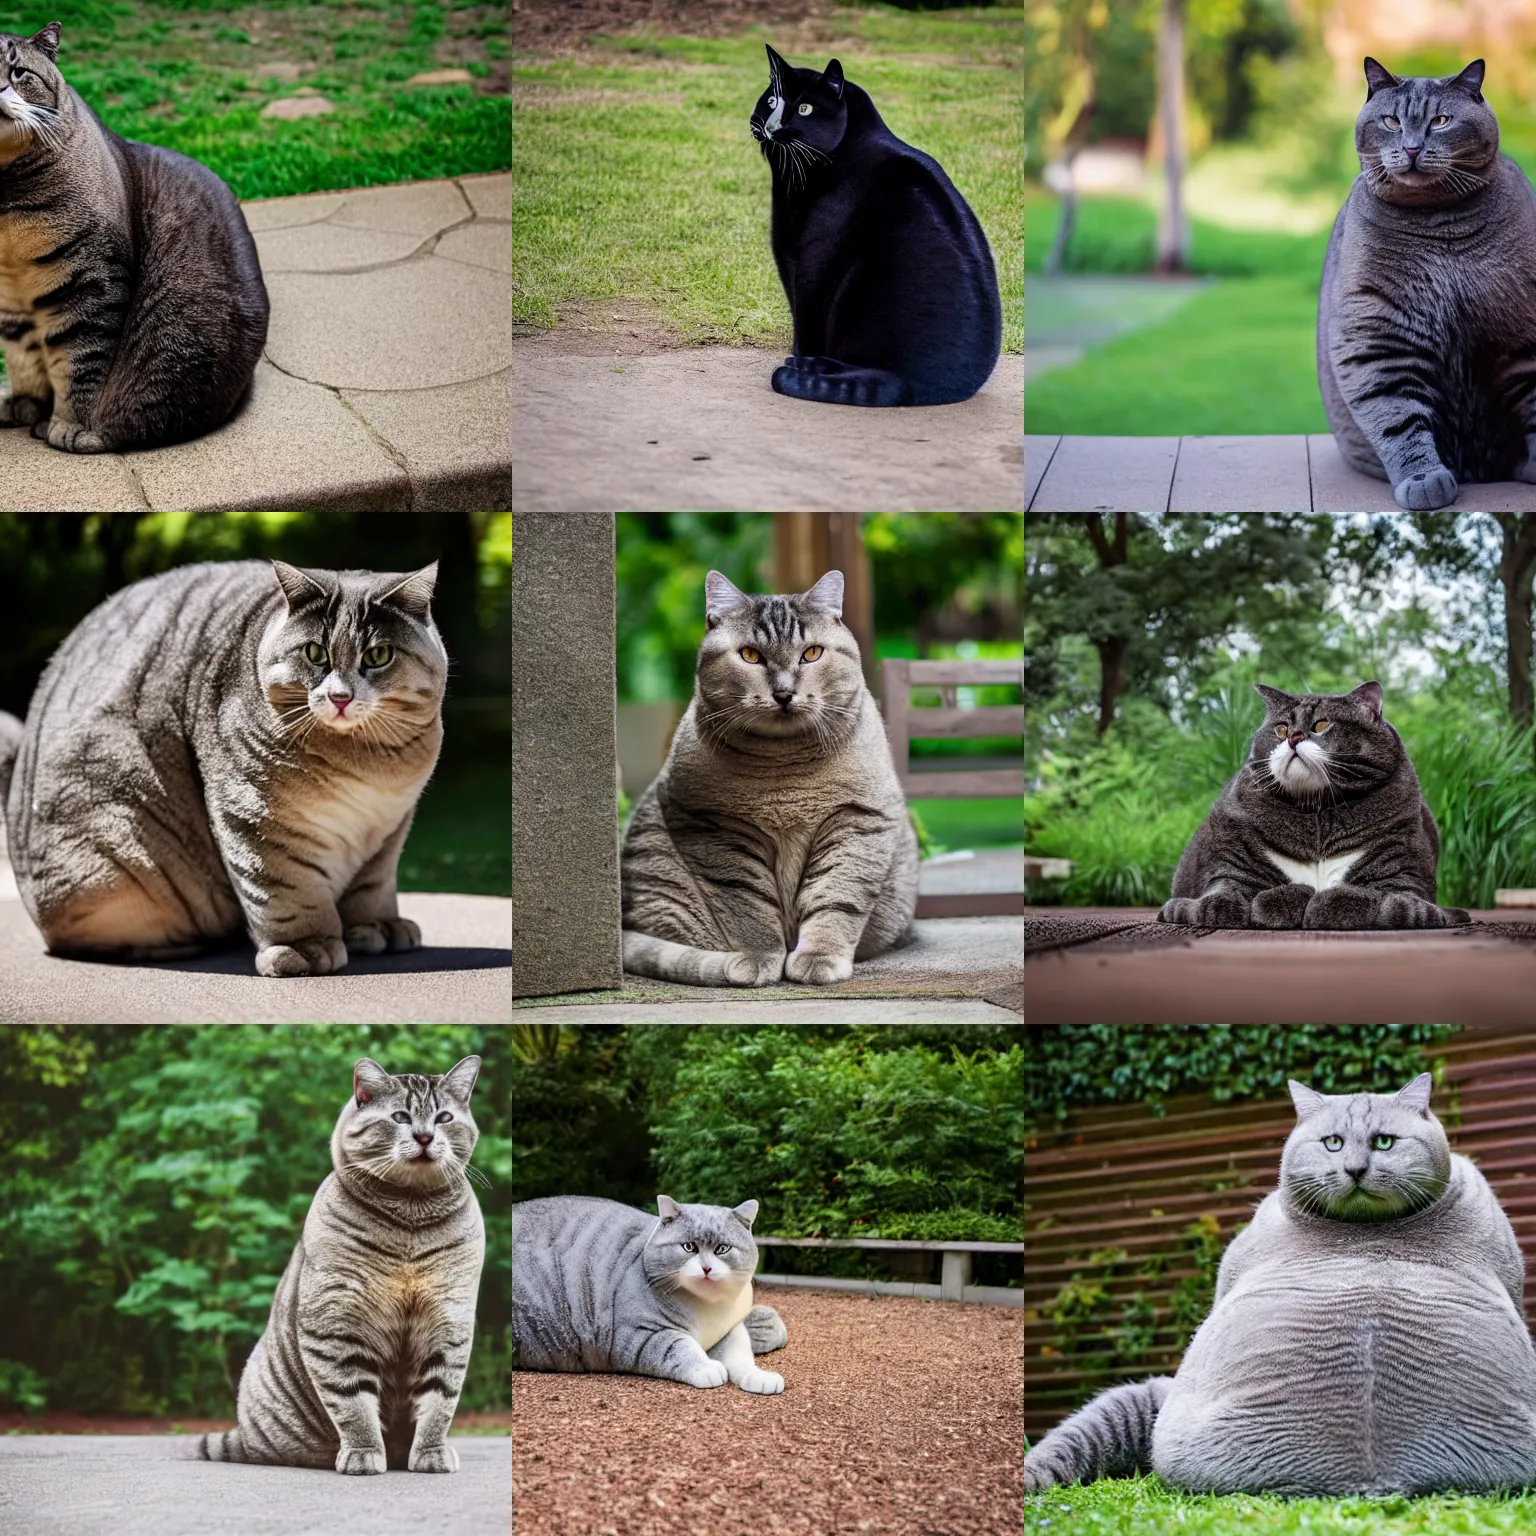 Prompt: full body view of a ridiculously oversized massive Chonker Cat sitting outdoors, morbidly obese, professional photo, beautiful cat feet, XF IQ4, 150MP, 50mm, F1.4, ISO 200, 1/160s, natural light